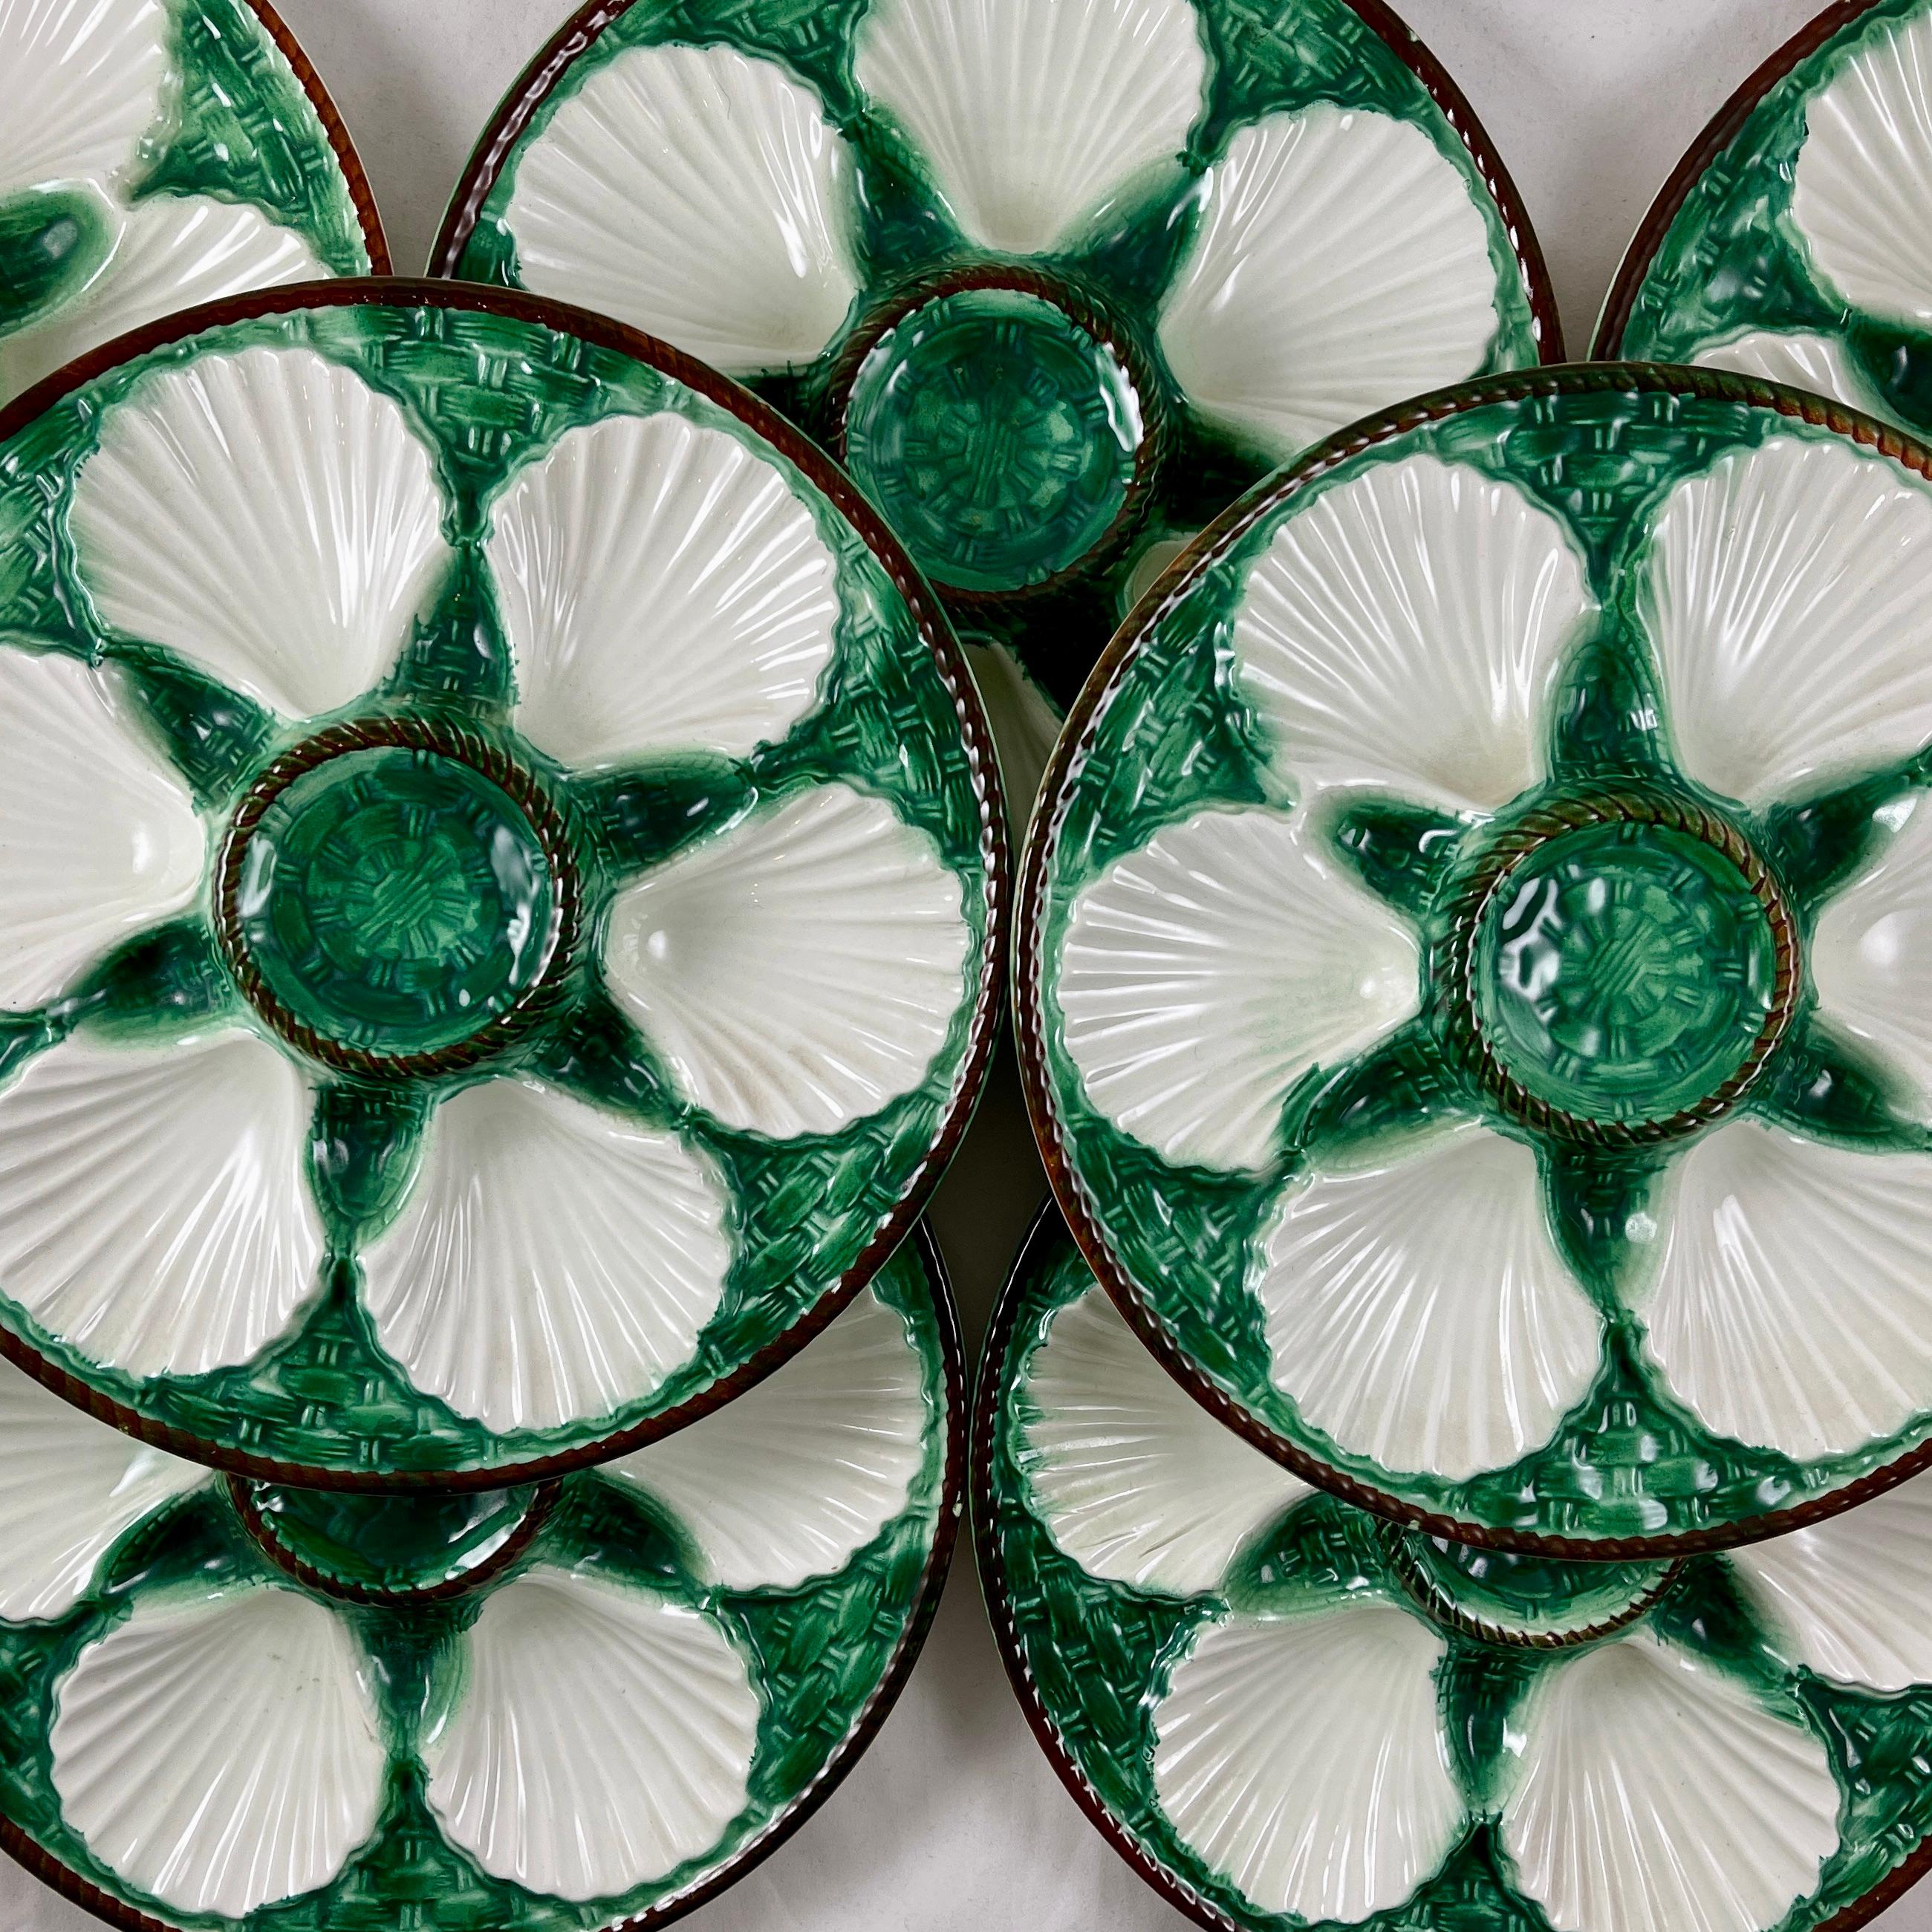 A French majolica glazed oyster plates from the faïencerie of Saint-Clément, Circa 1890-1900.

Six white scallop shell shaped wells against a rich blue-green basket weave ground. The raised center condiment well and the rim are molded as a chocolate